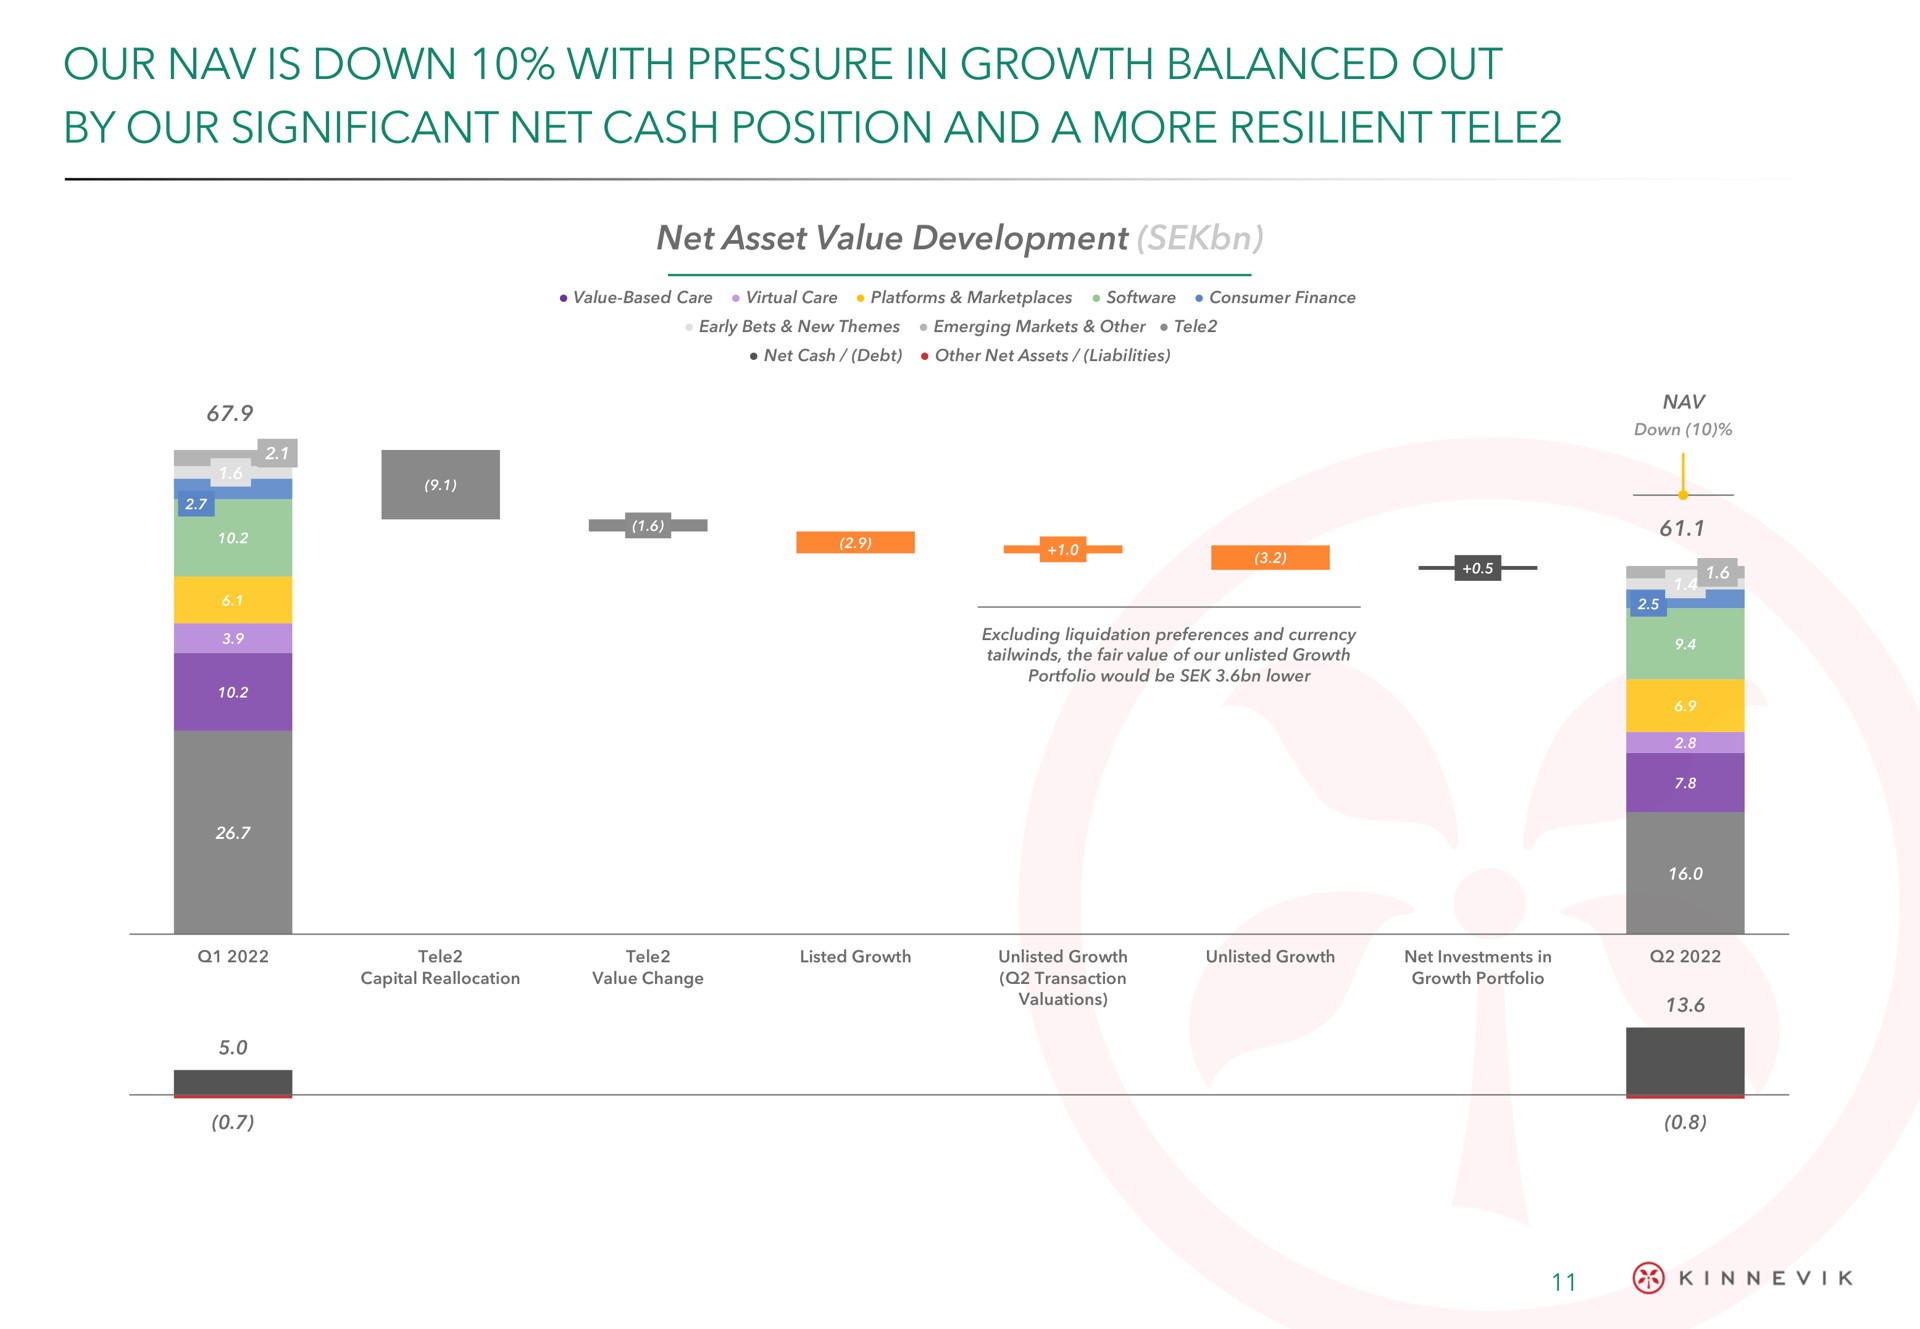 our is down with pressure in growth balanced out by our significant net cash position and a more resilient tele | Kinnevik